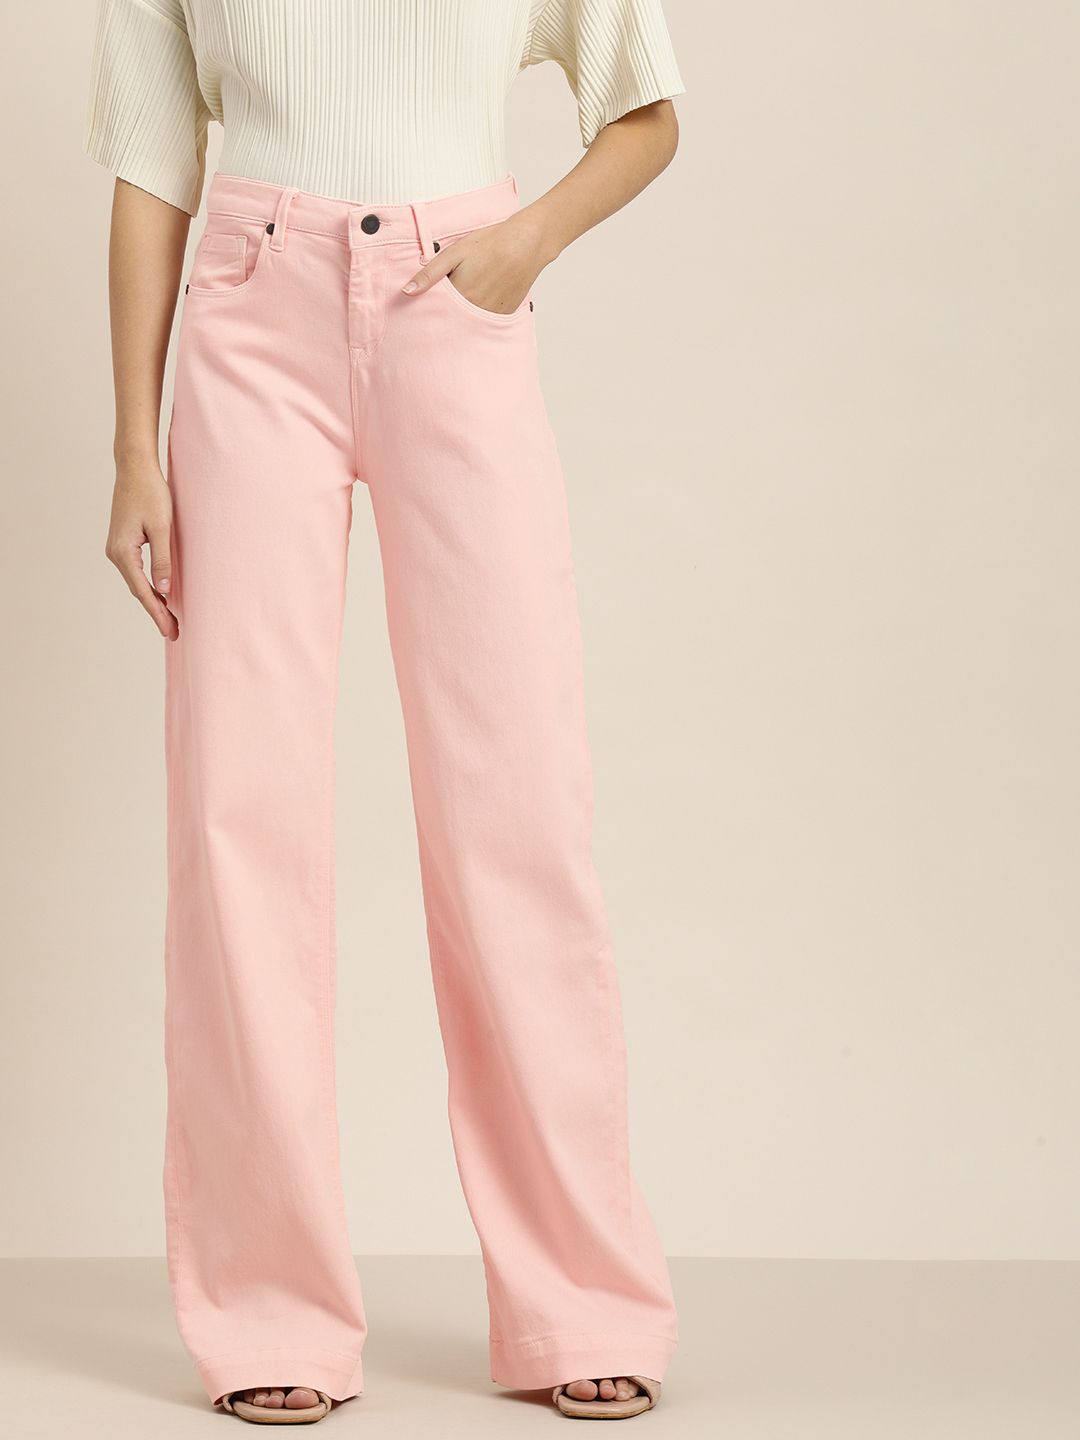 Moda Rapido Women Pink Wide Leg Mid-Rise Clean Look Jeans Price in India